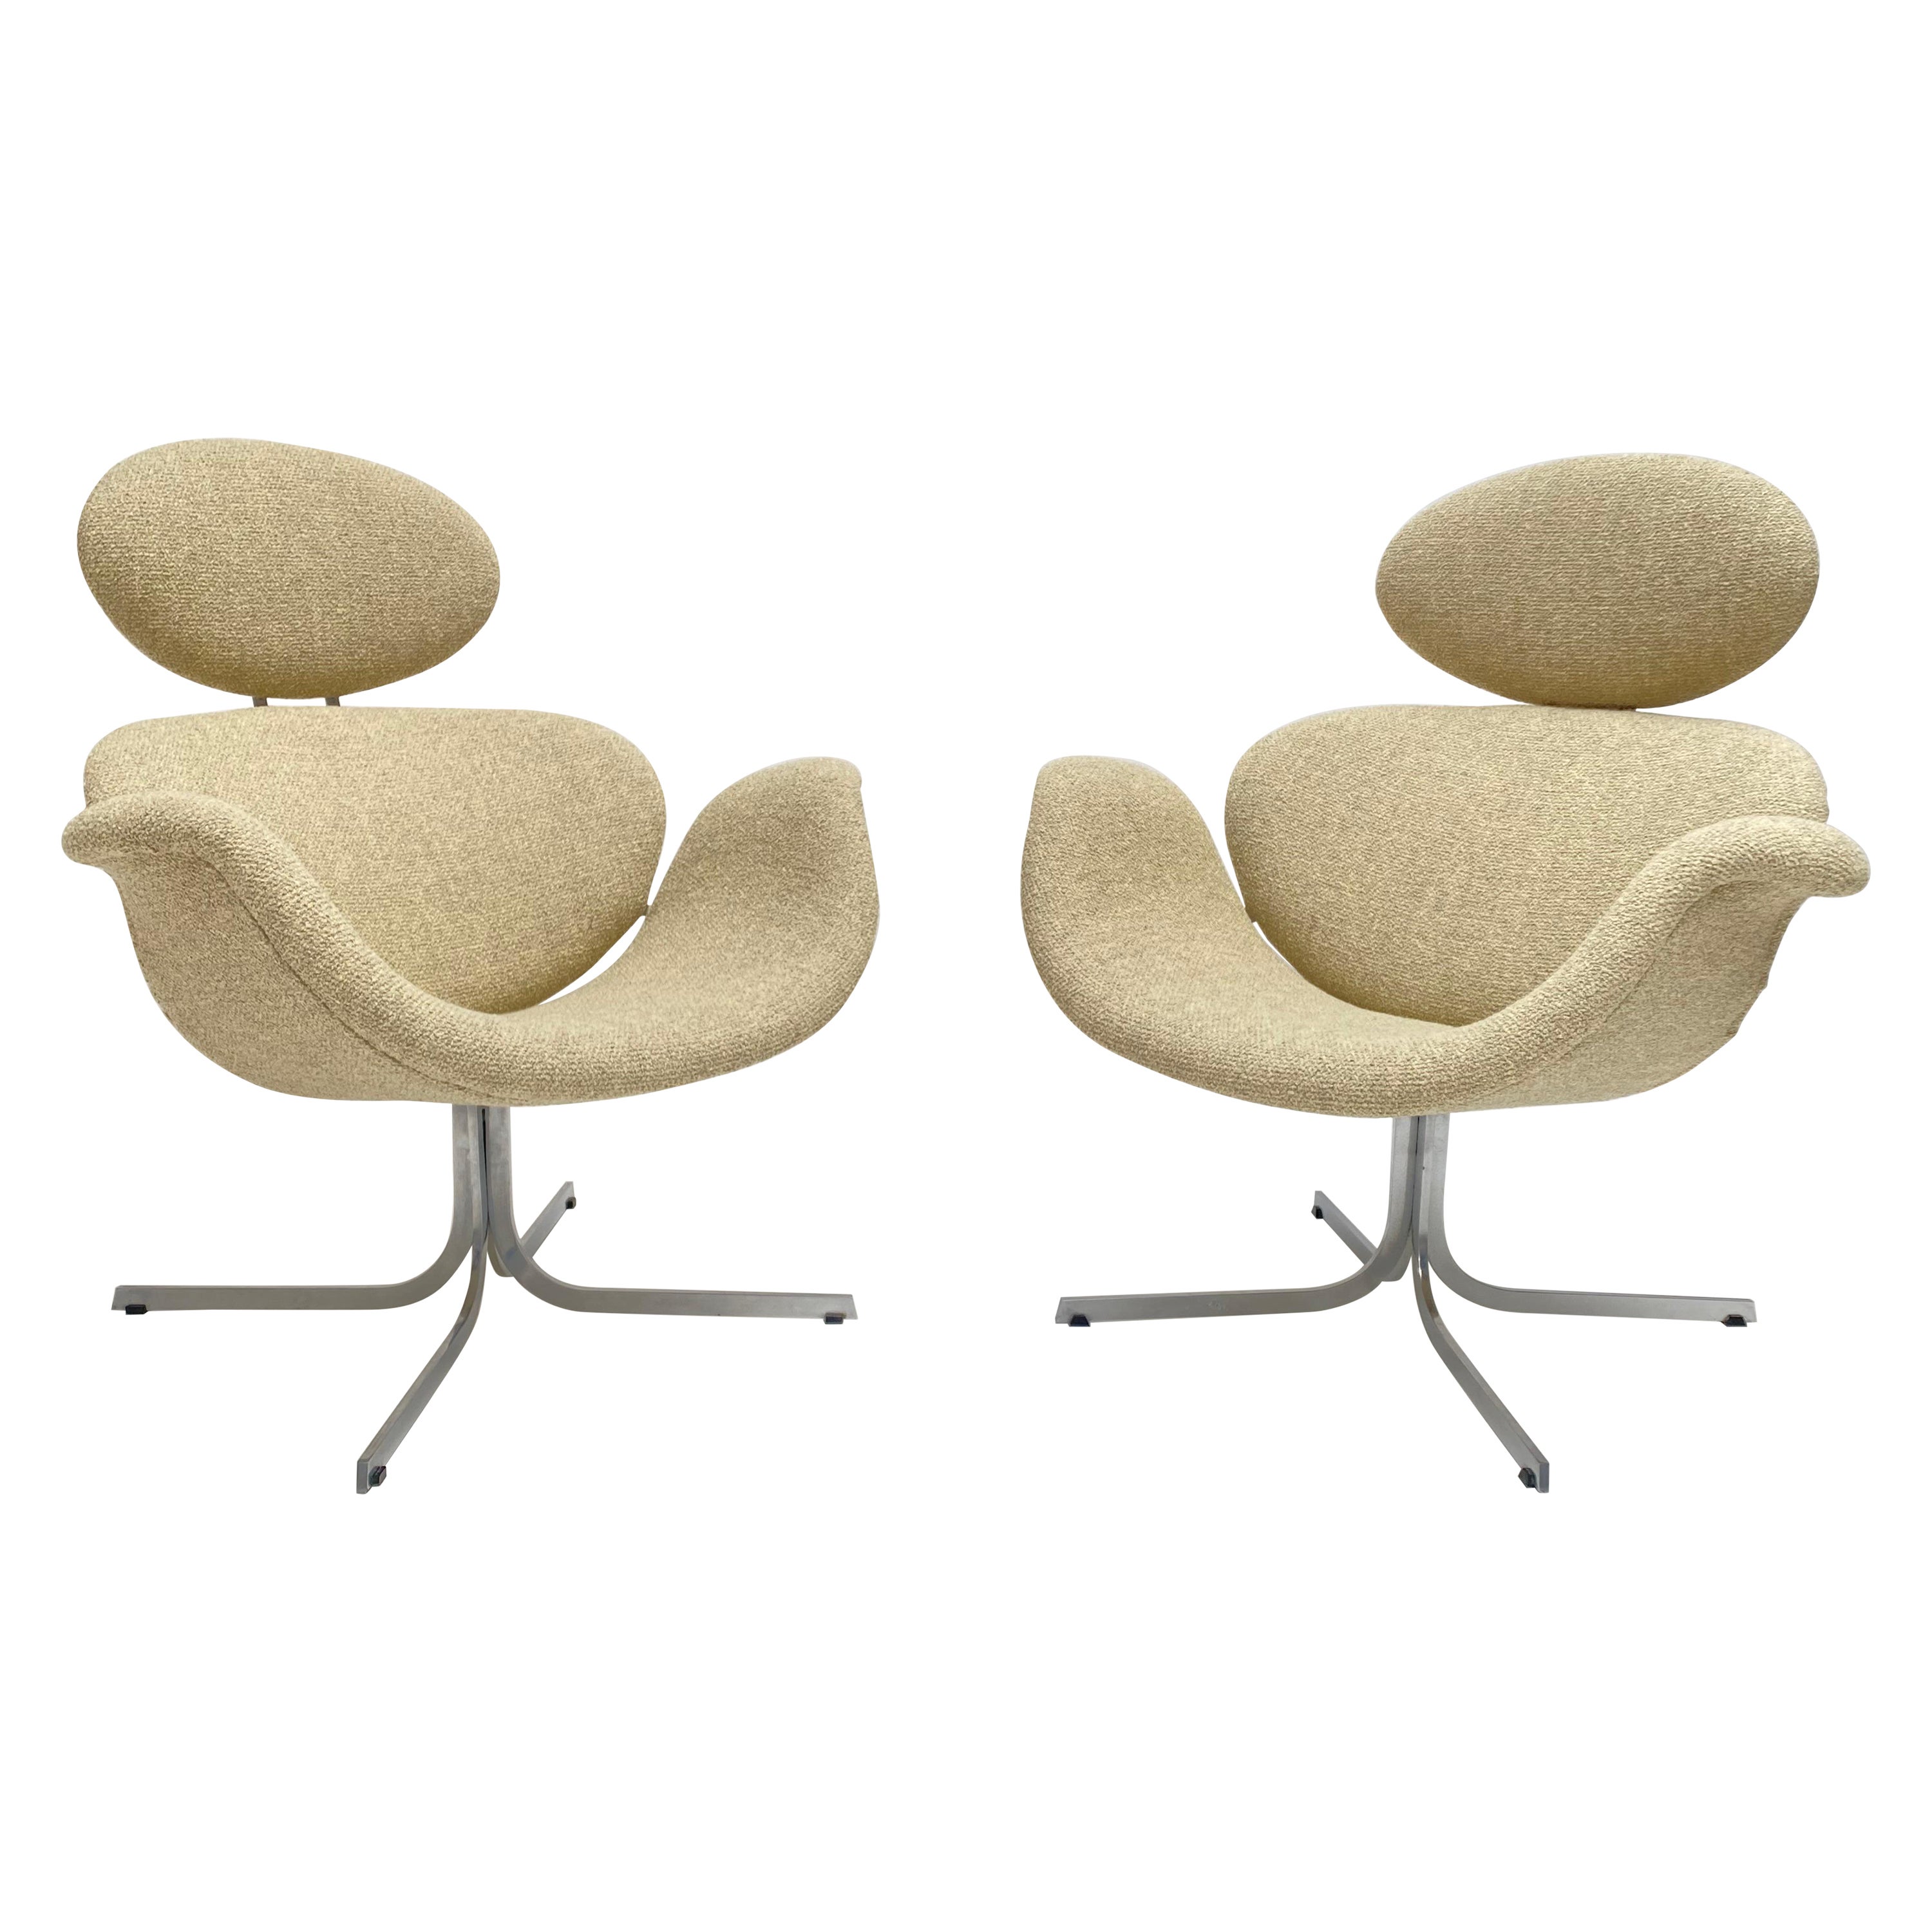 Pair First Edition "Big Tulip" Lounge Chairs F551 by Pierre Paulin Artifort 1959